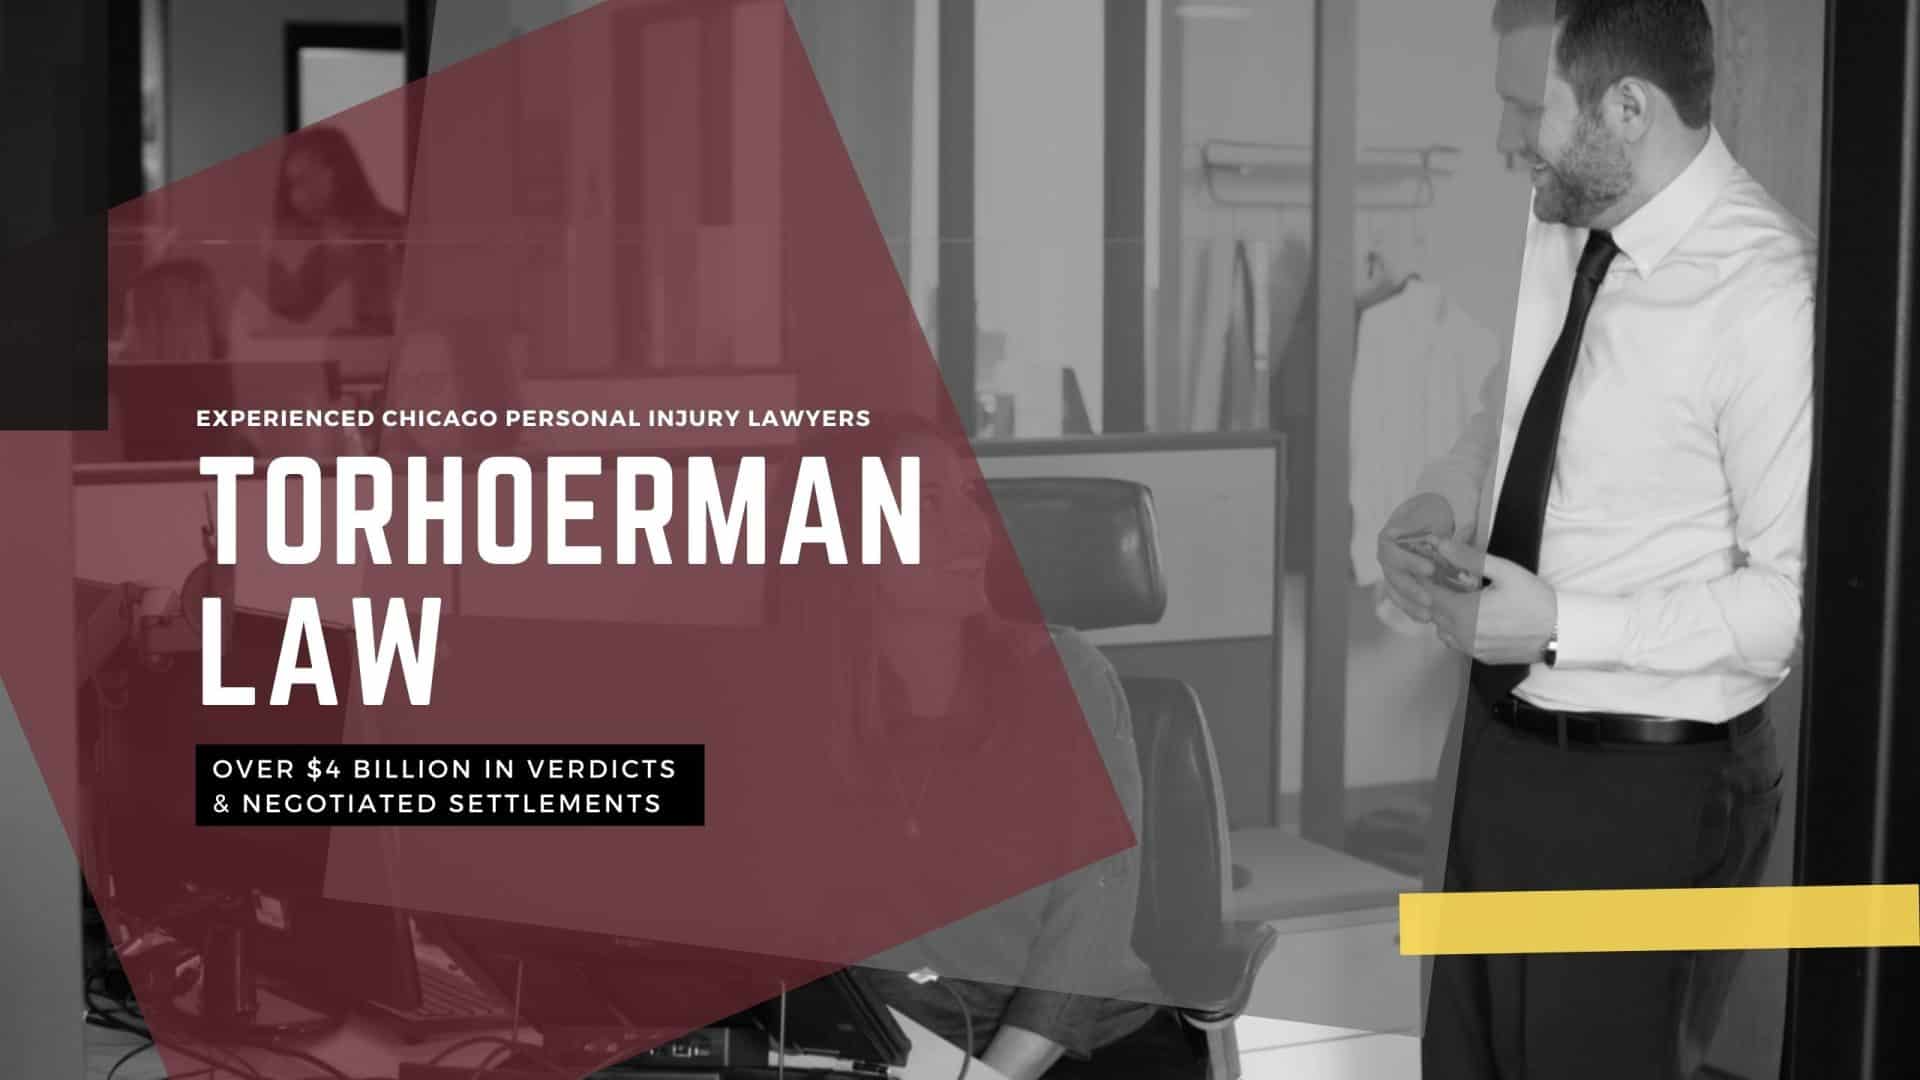 Experienced Chicago Personal Injury Law Firm | Experienced Chicago Personal Injury Lawyers | TorHoerman Law